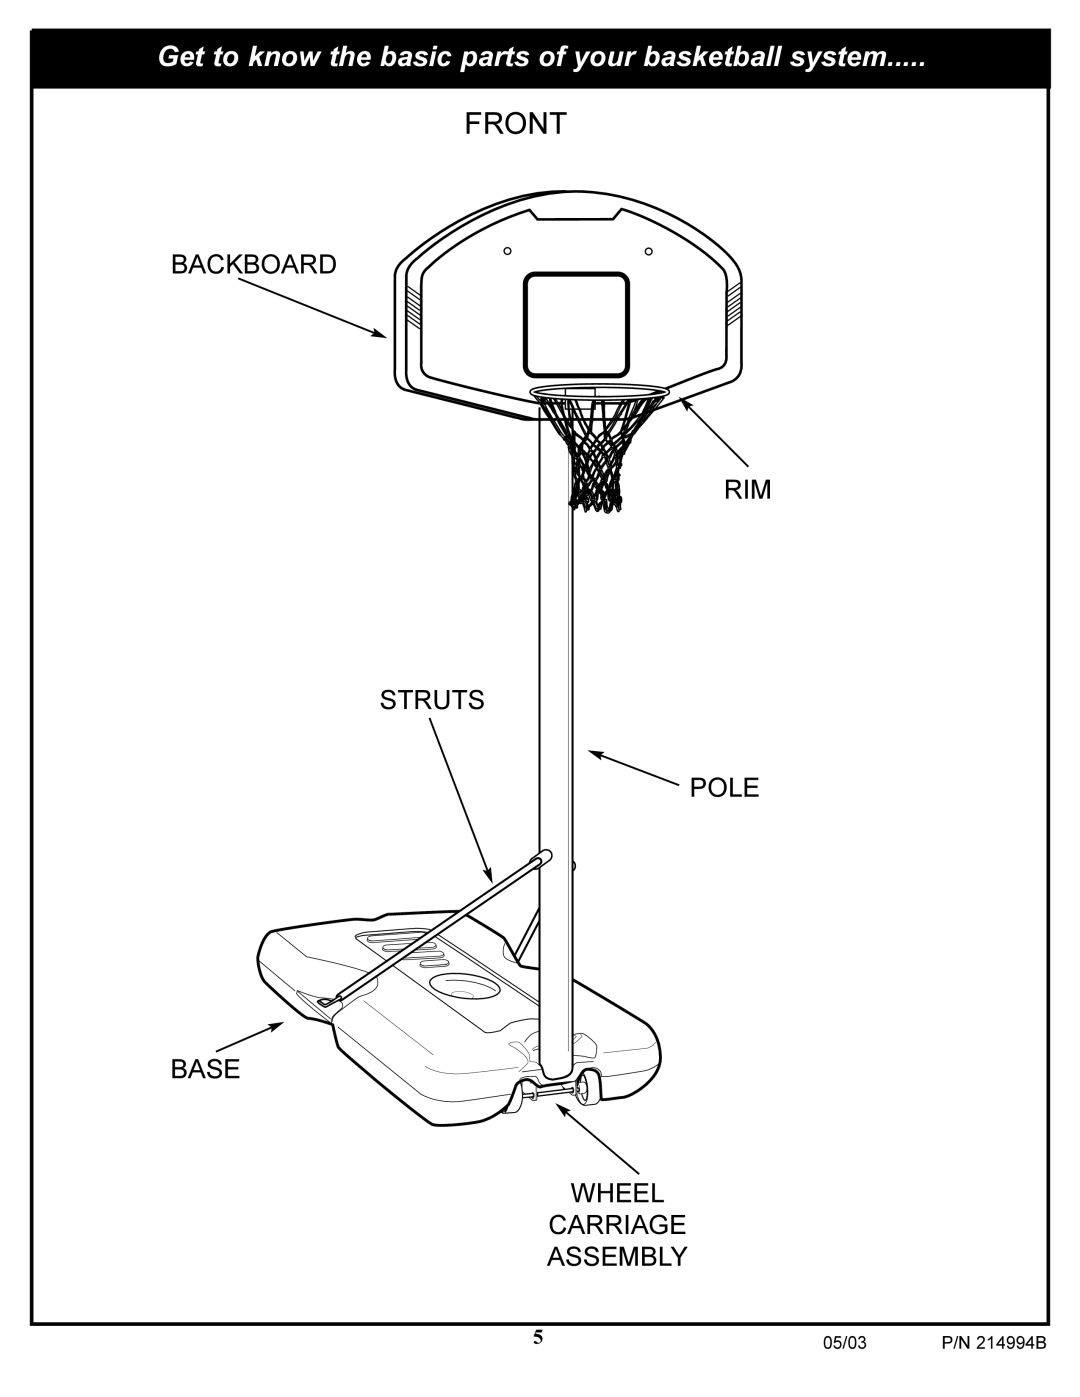 Spalding 214994B manual Front, Get to know the basic parts of your basketball system 